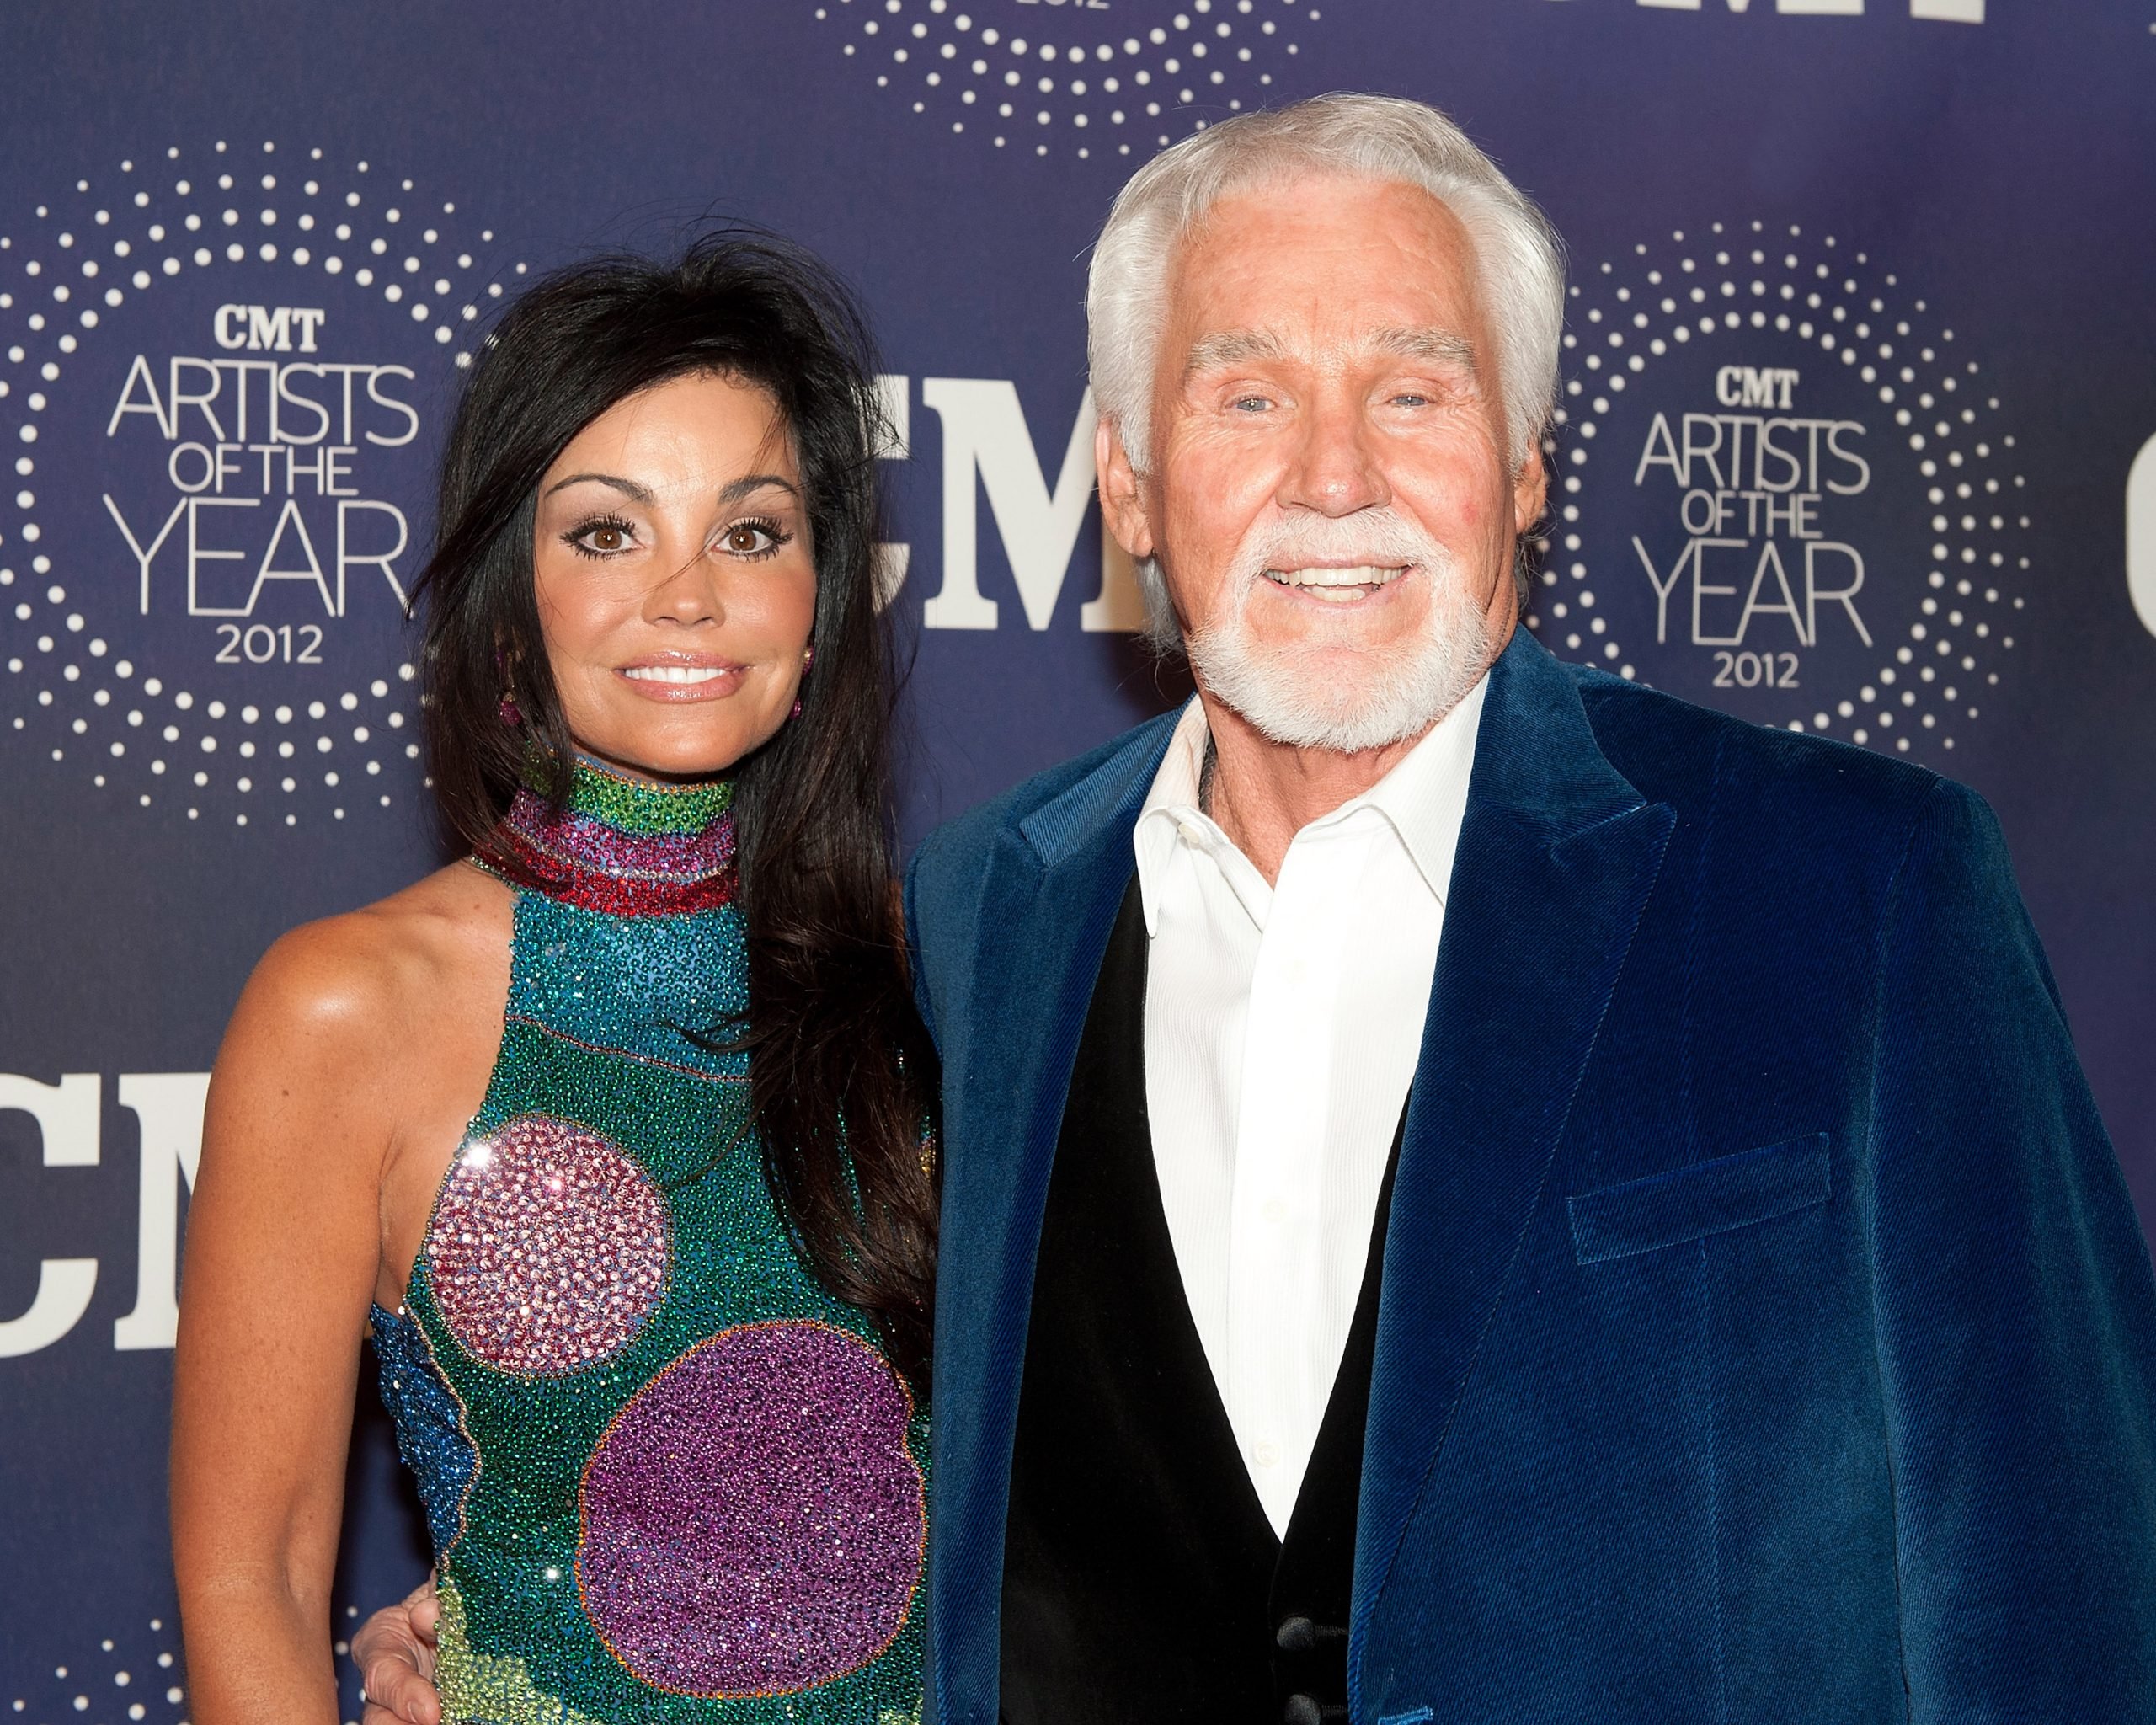 Kenny Rogers with his wife, Wanda Miller, in 2012